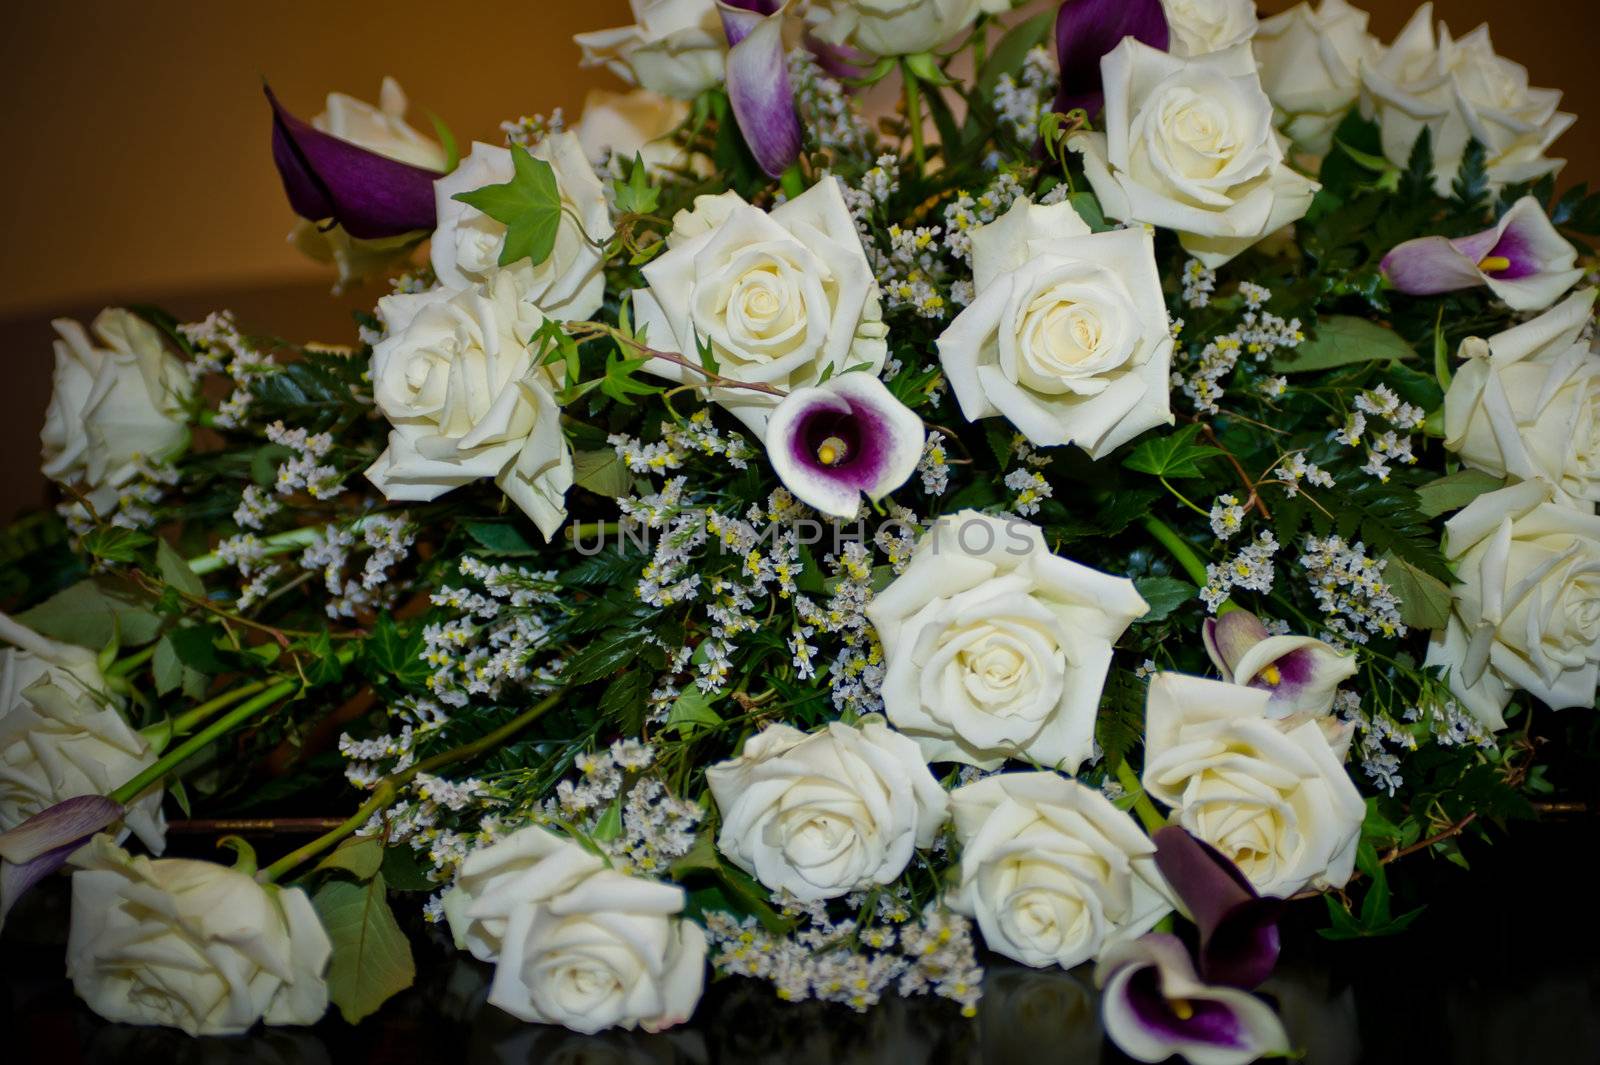 Bouquet of white roses and white and purple calla lilies